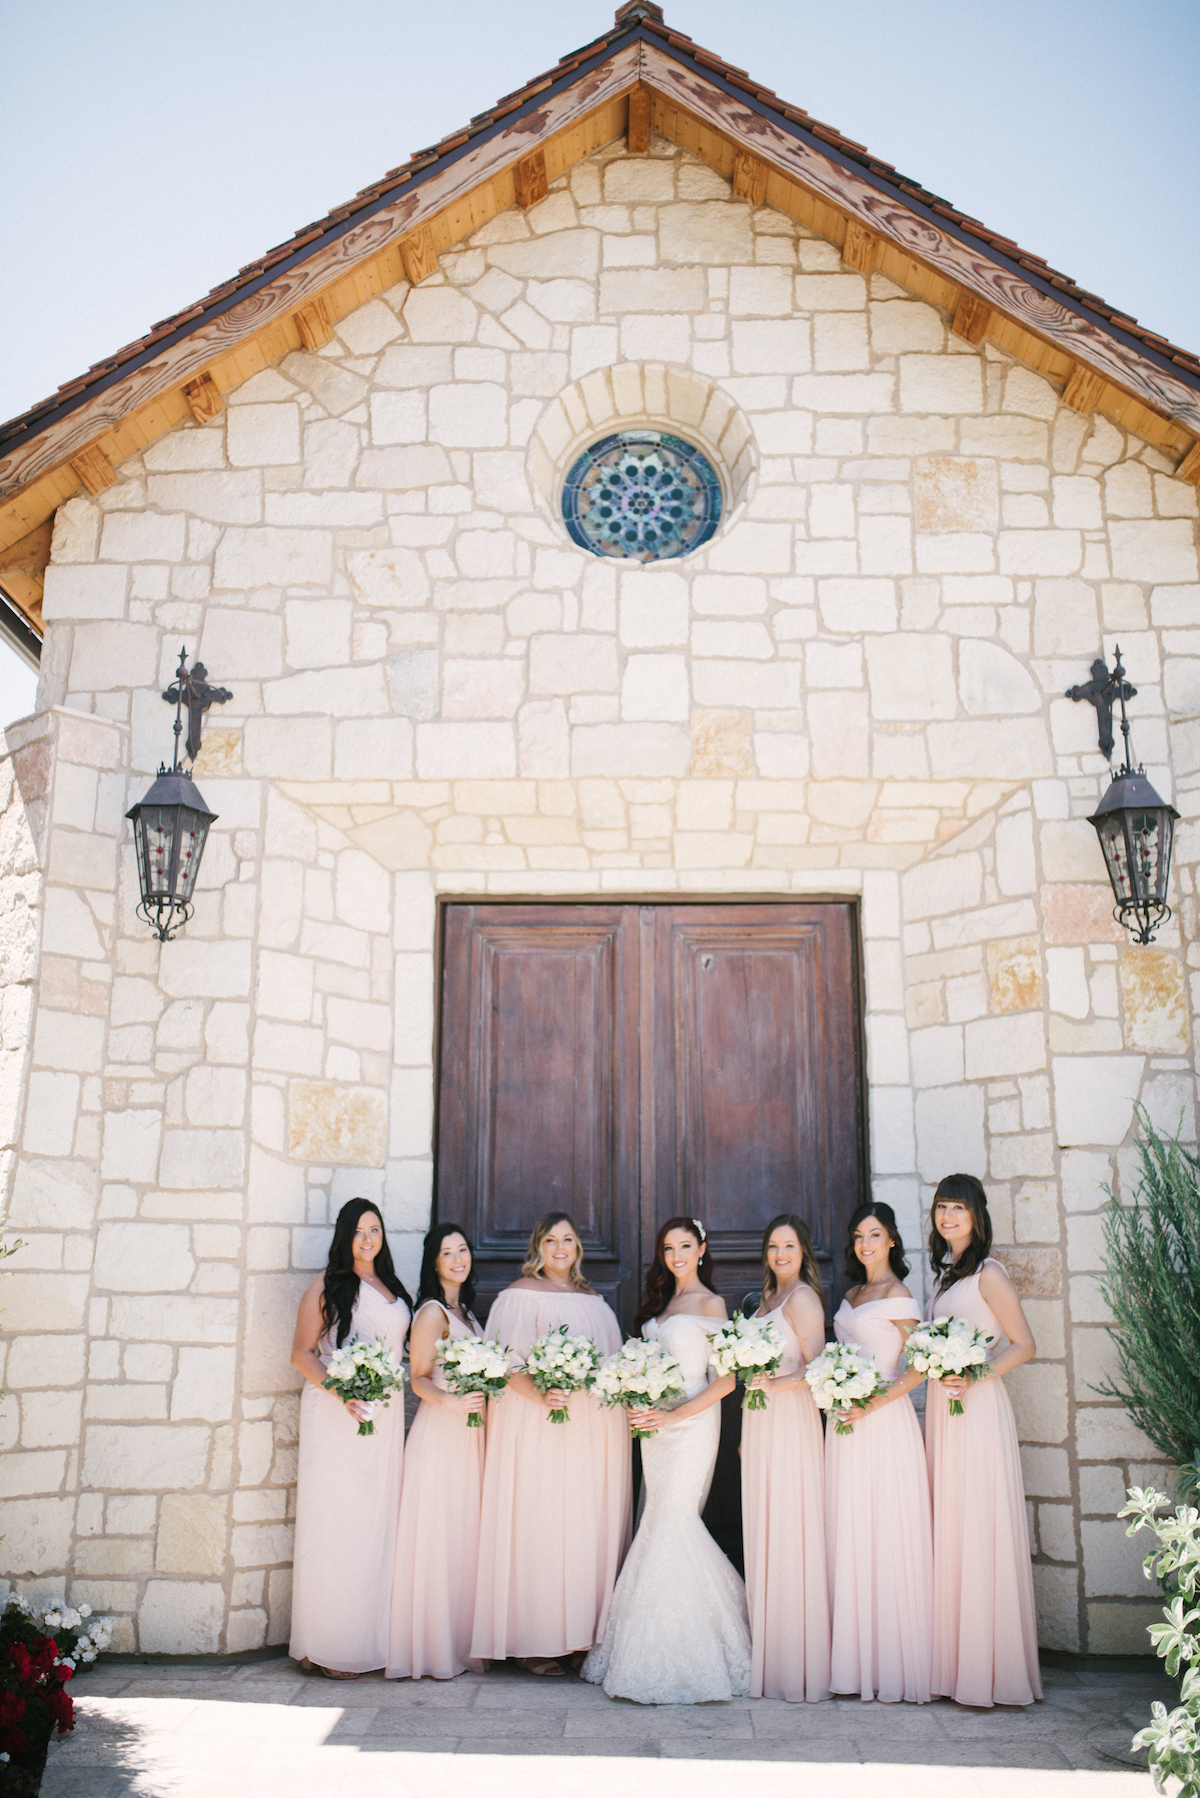 Allegretto Resort and Vineyard wedding in Tuscan style chapel